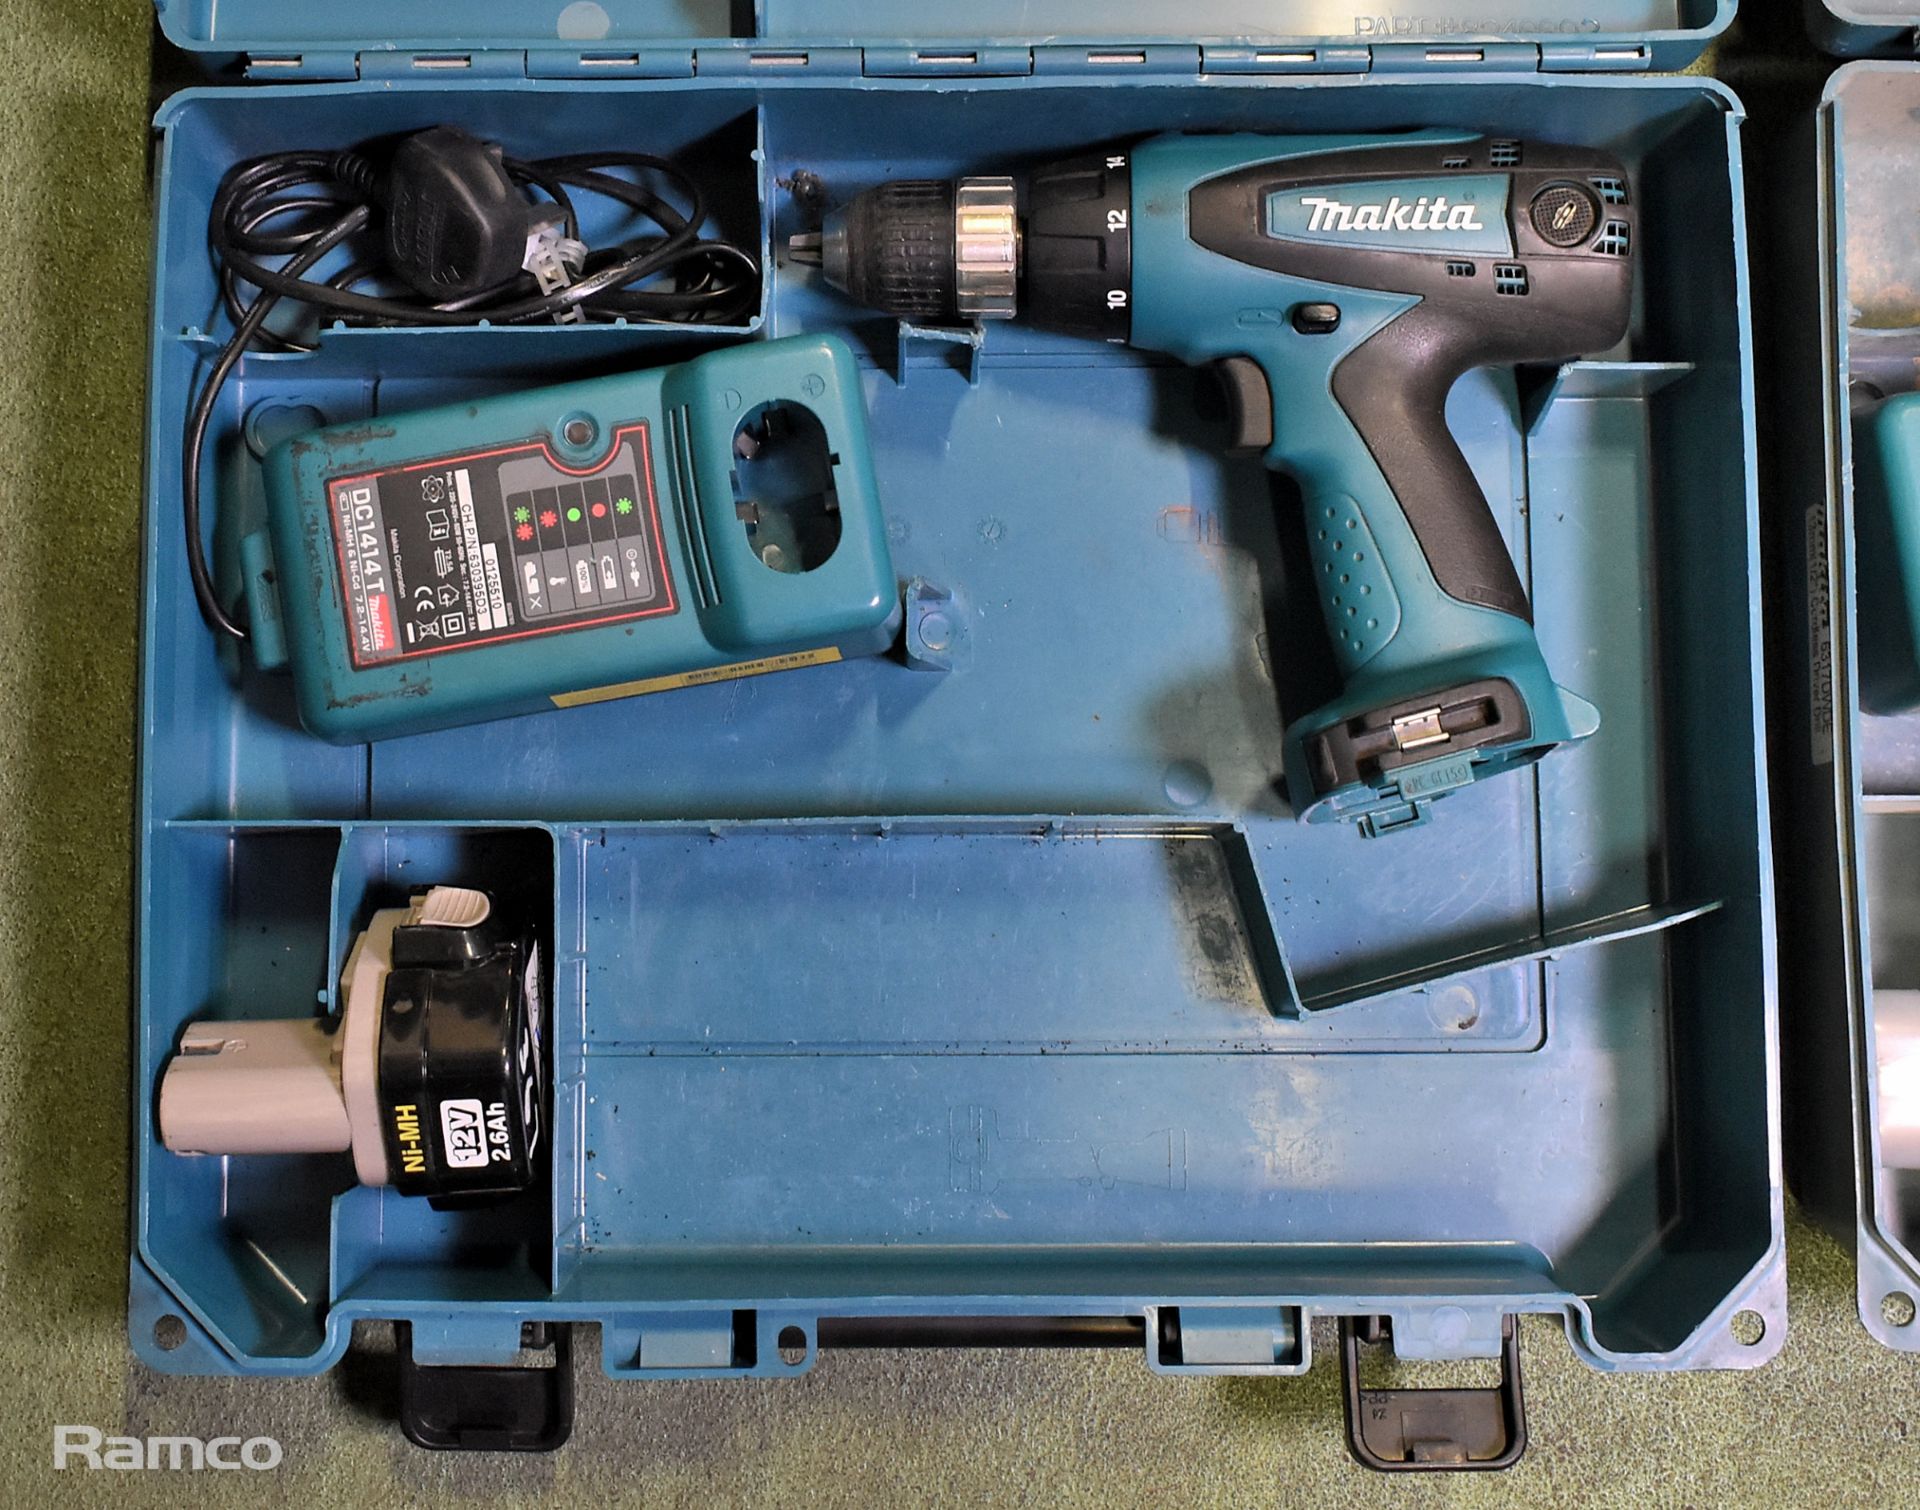 2x Makita 6317D cordless drills - DC1414T charger - 1x 12V battery - case - Image 2 of 7